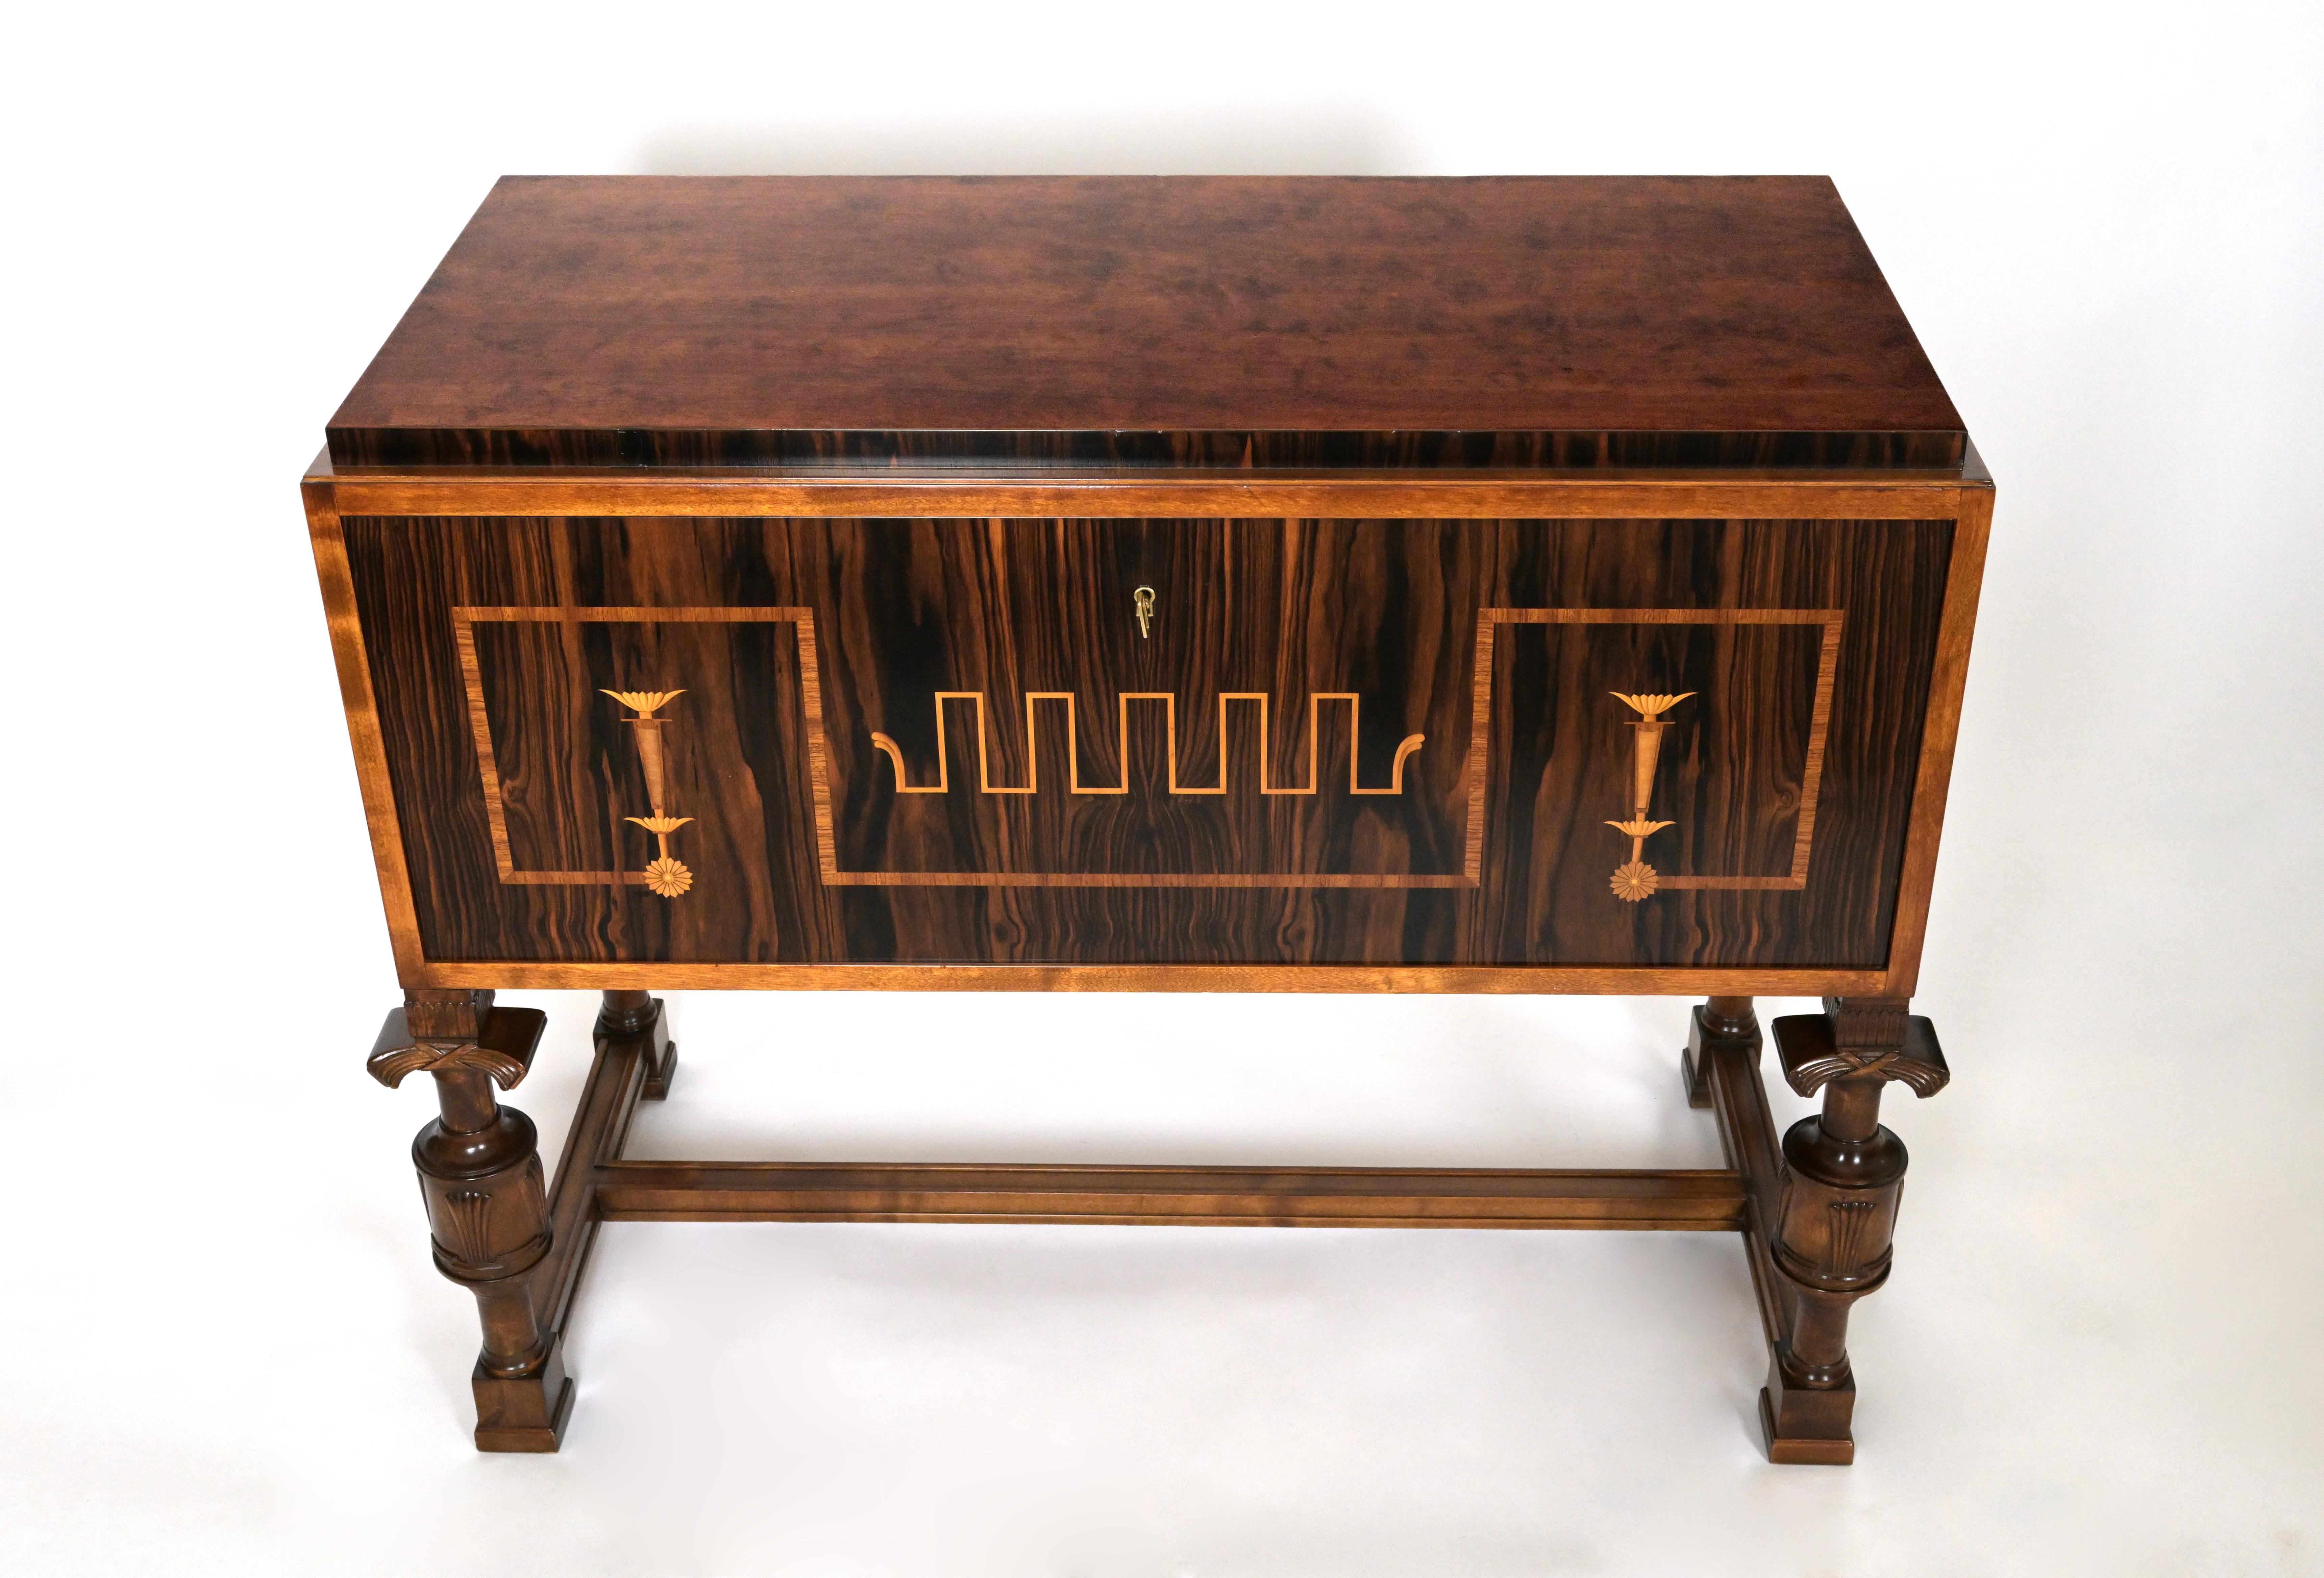 A Swedish Grace Period fall front cabinet. The table height surface having rosewood veneer in fall front with stylize geometric marquetry inlaid in figurine contrasting veneer. The base held upon four carved legs in the form of four ballisteries